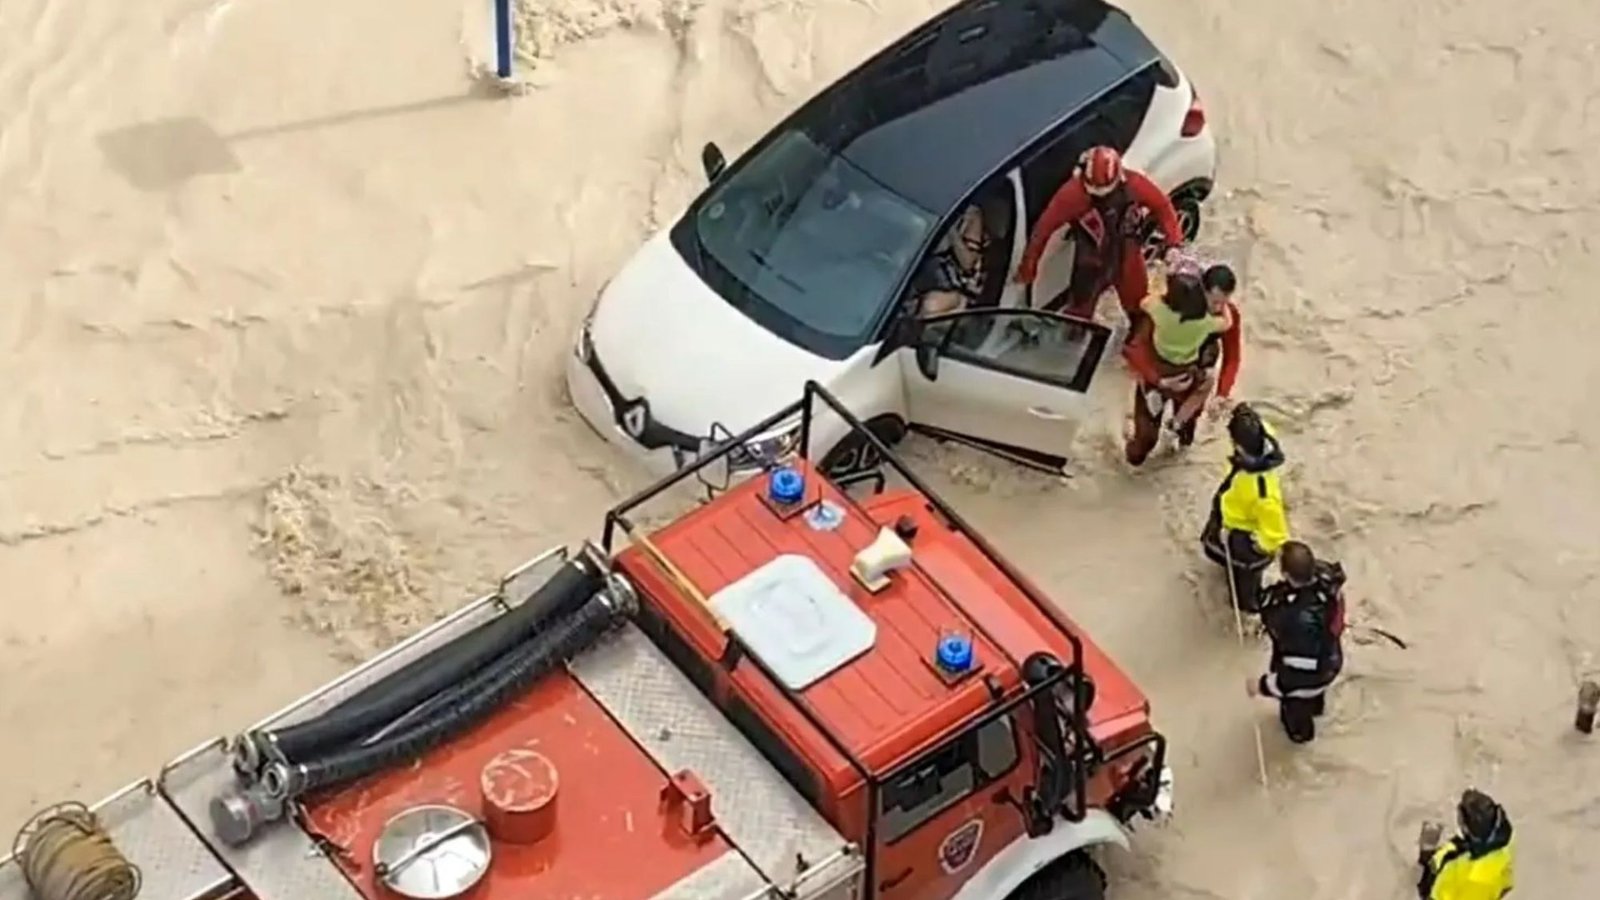 Major rescue operation at holiday hotspot as heavy flooding leaves drivers trapped in cars after Majorca airport chaos